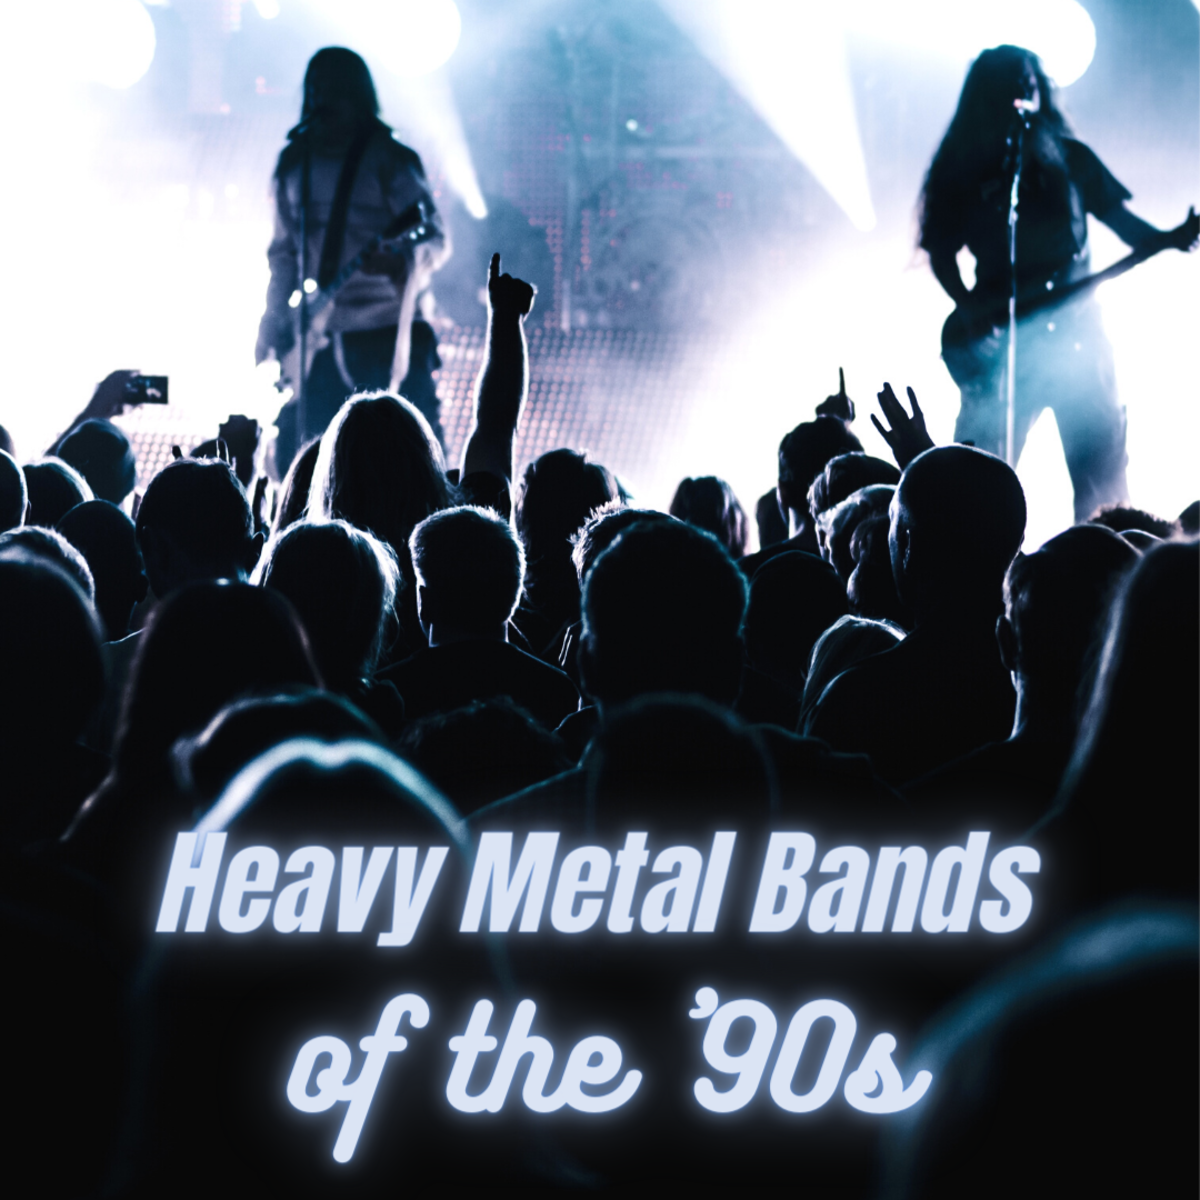 See if your favorite metal act appears on this list of the best '90s metal bands.